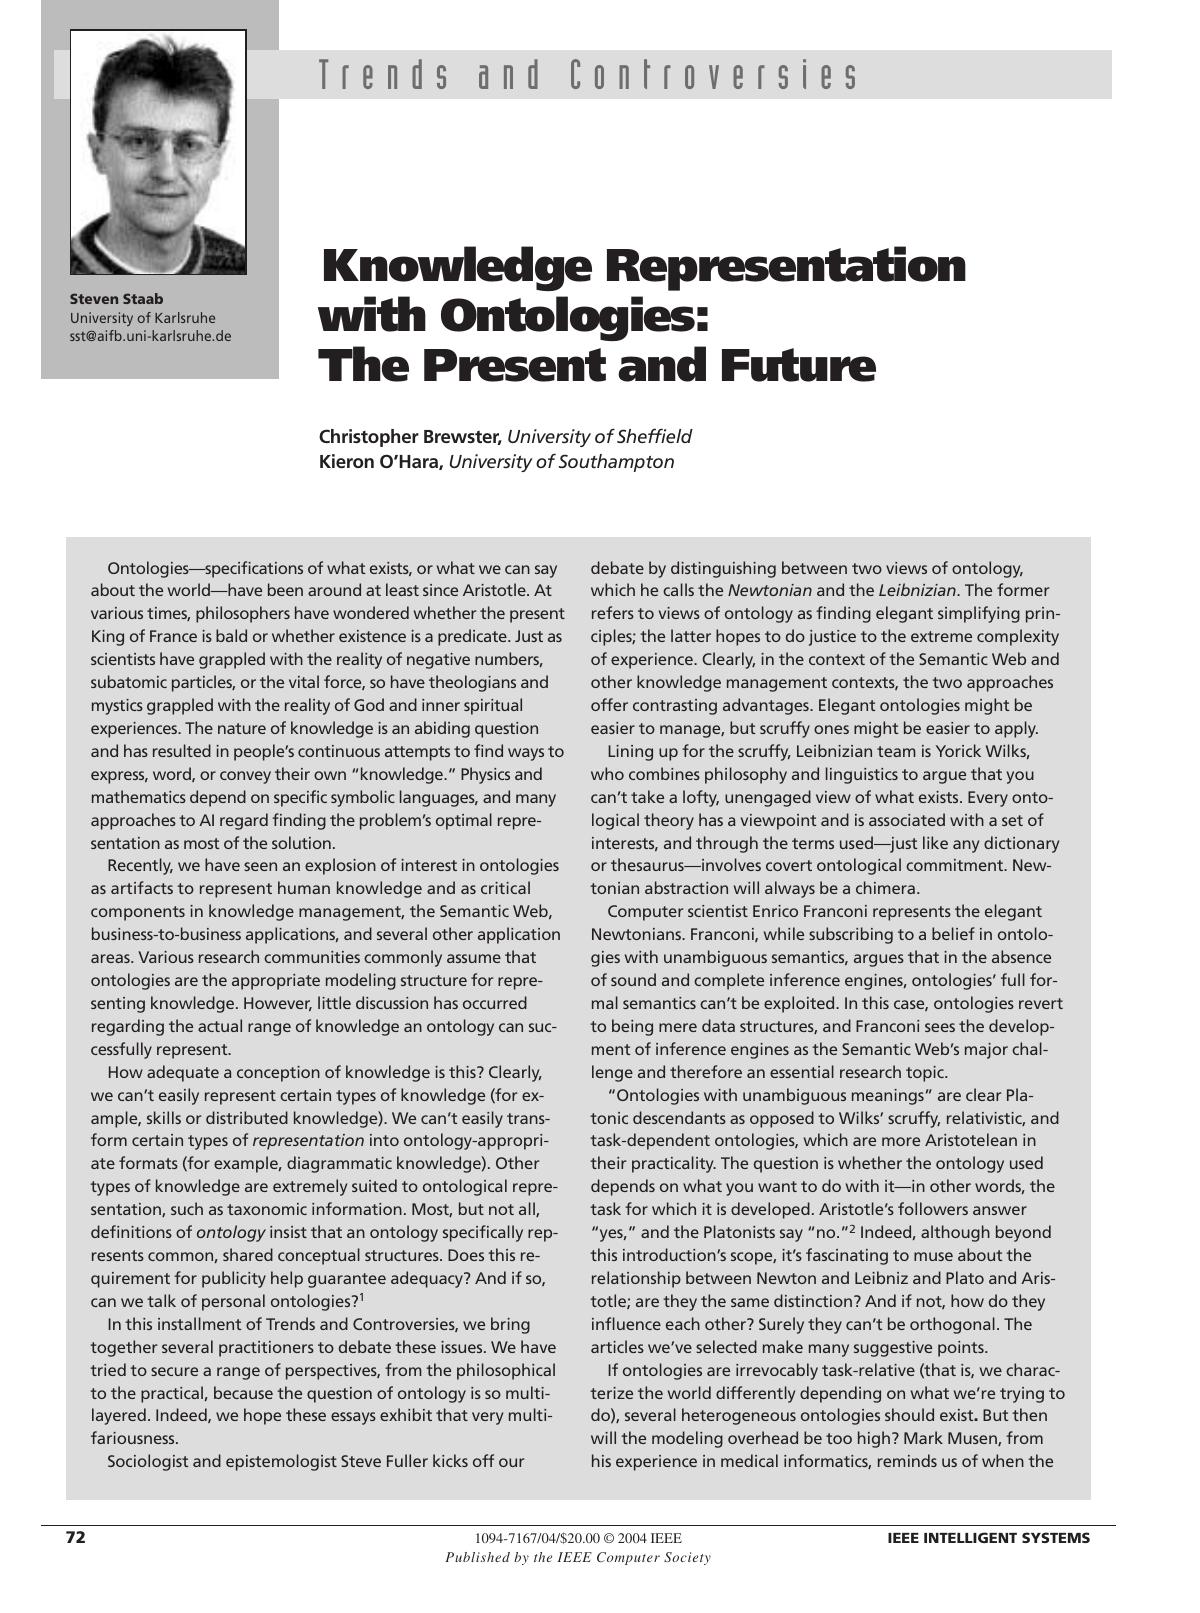 Knowledge Representation with Ontologies: The Present and Future